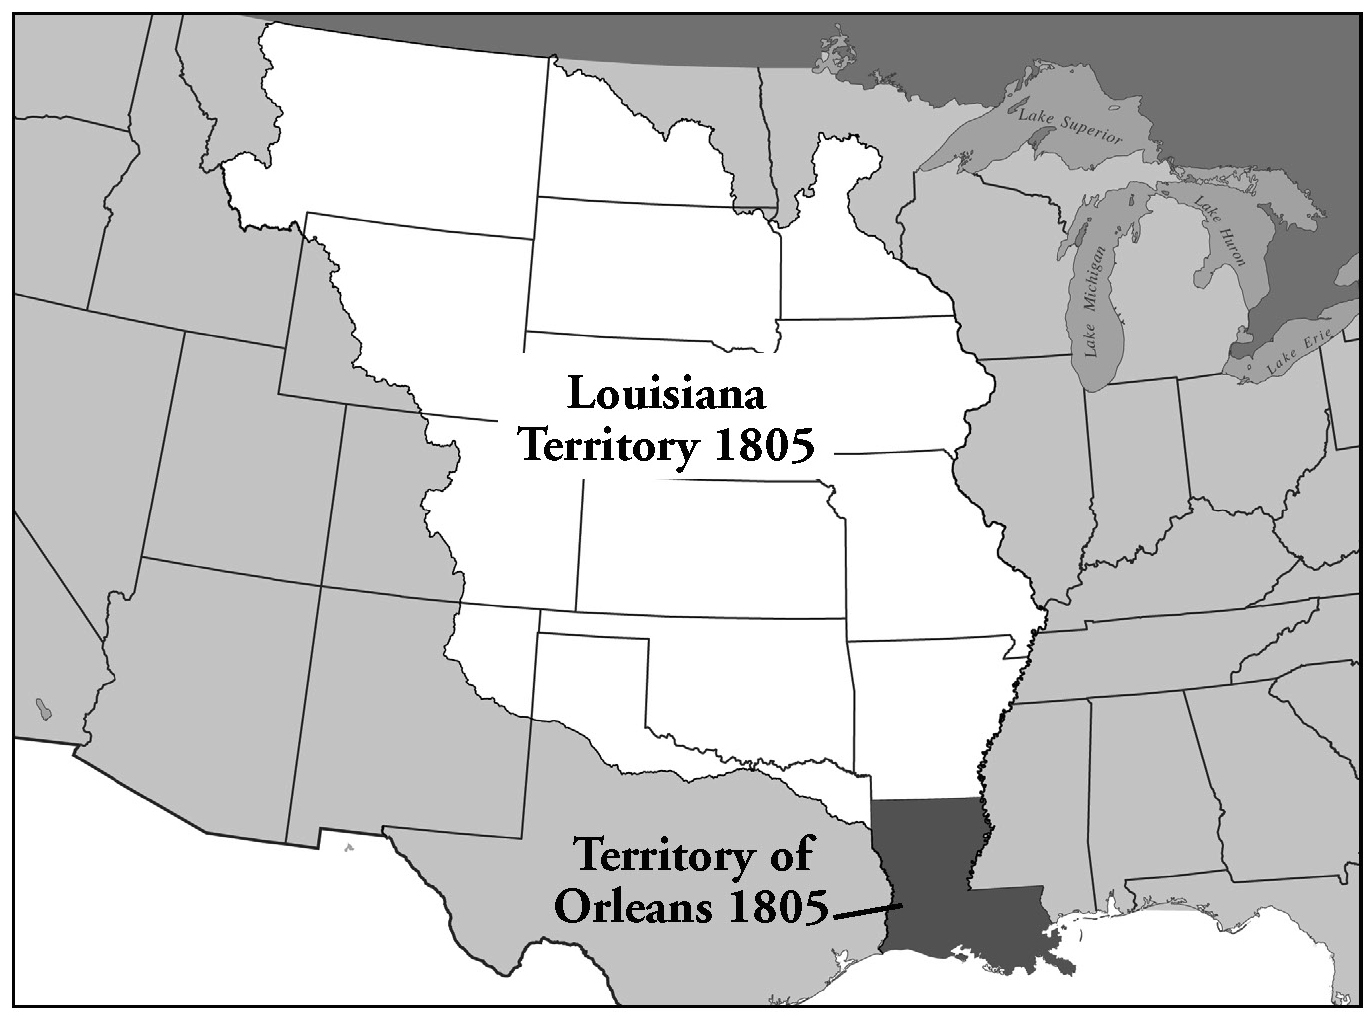 Louisian and Orleans Territories